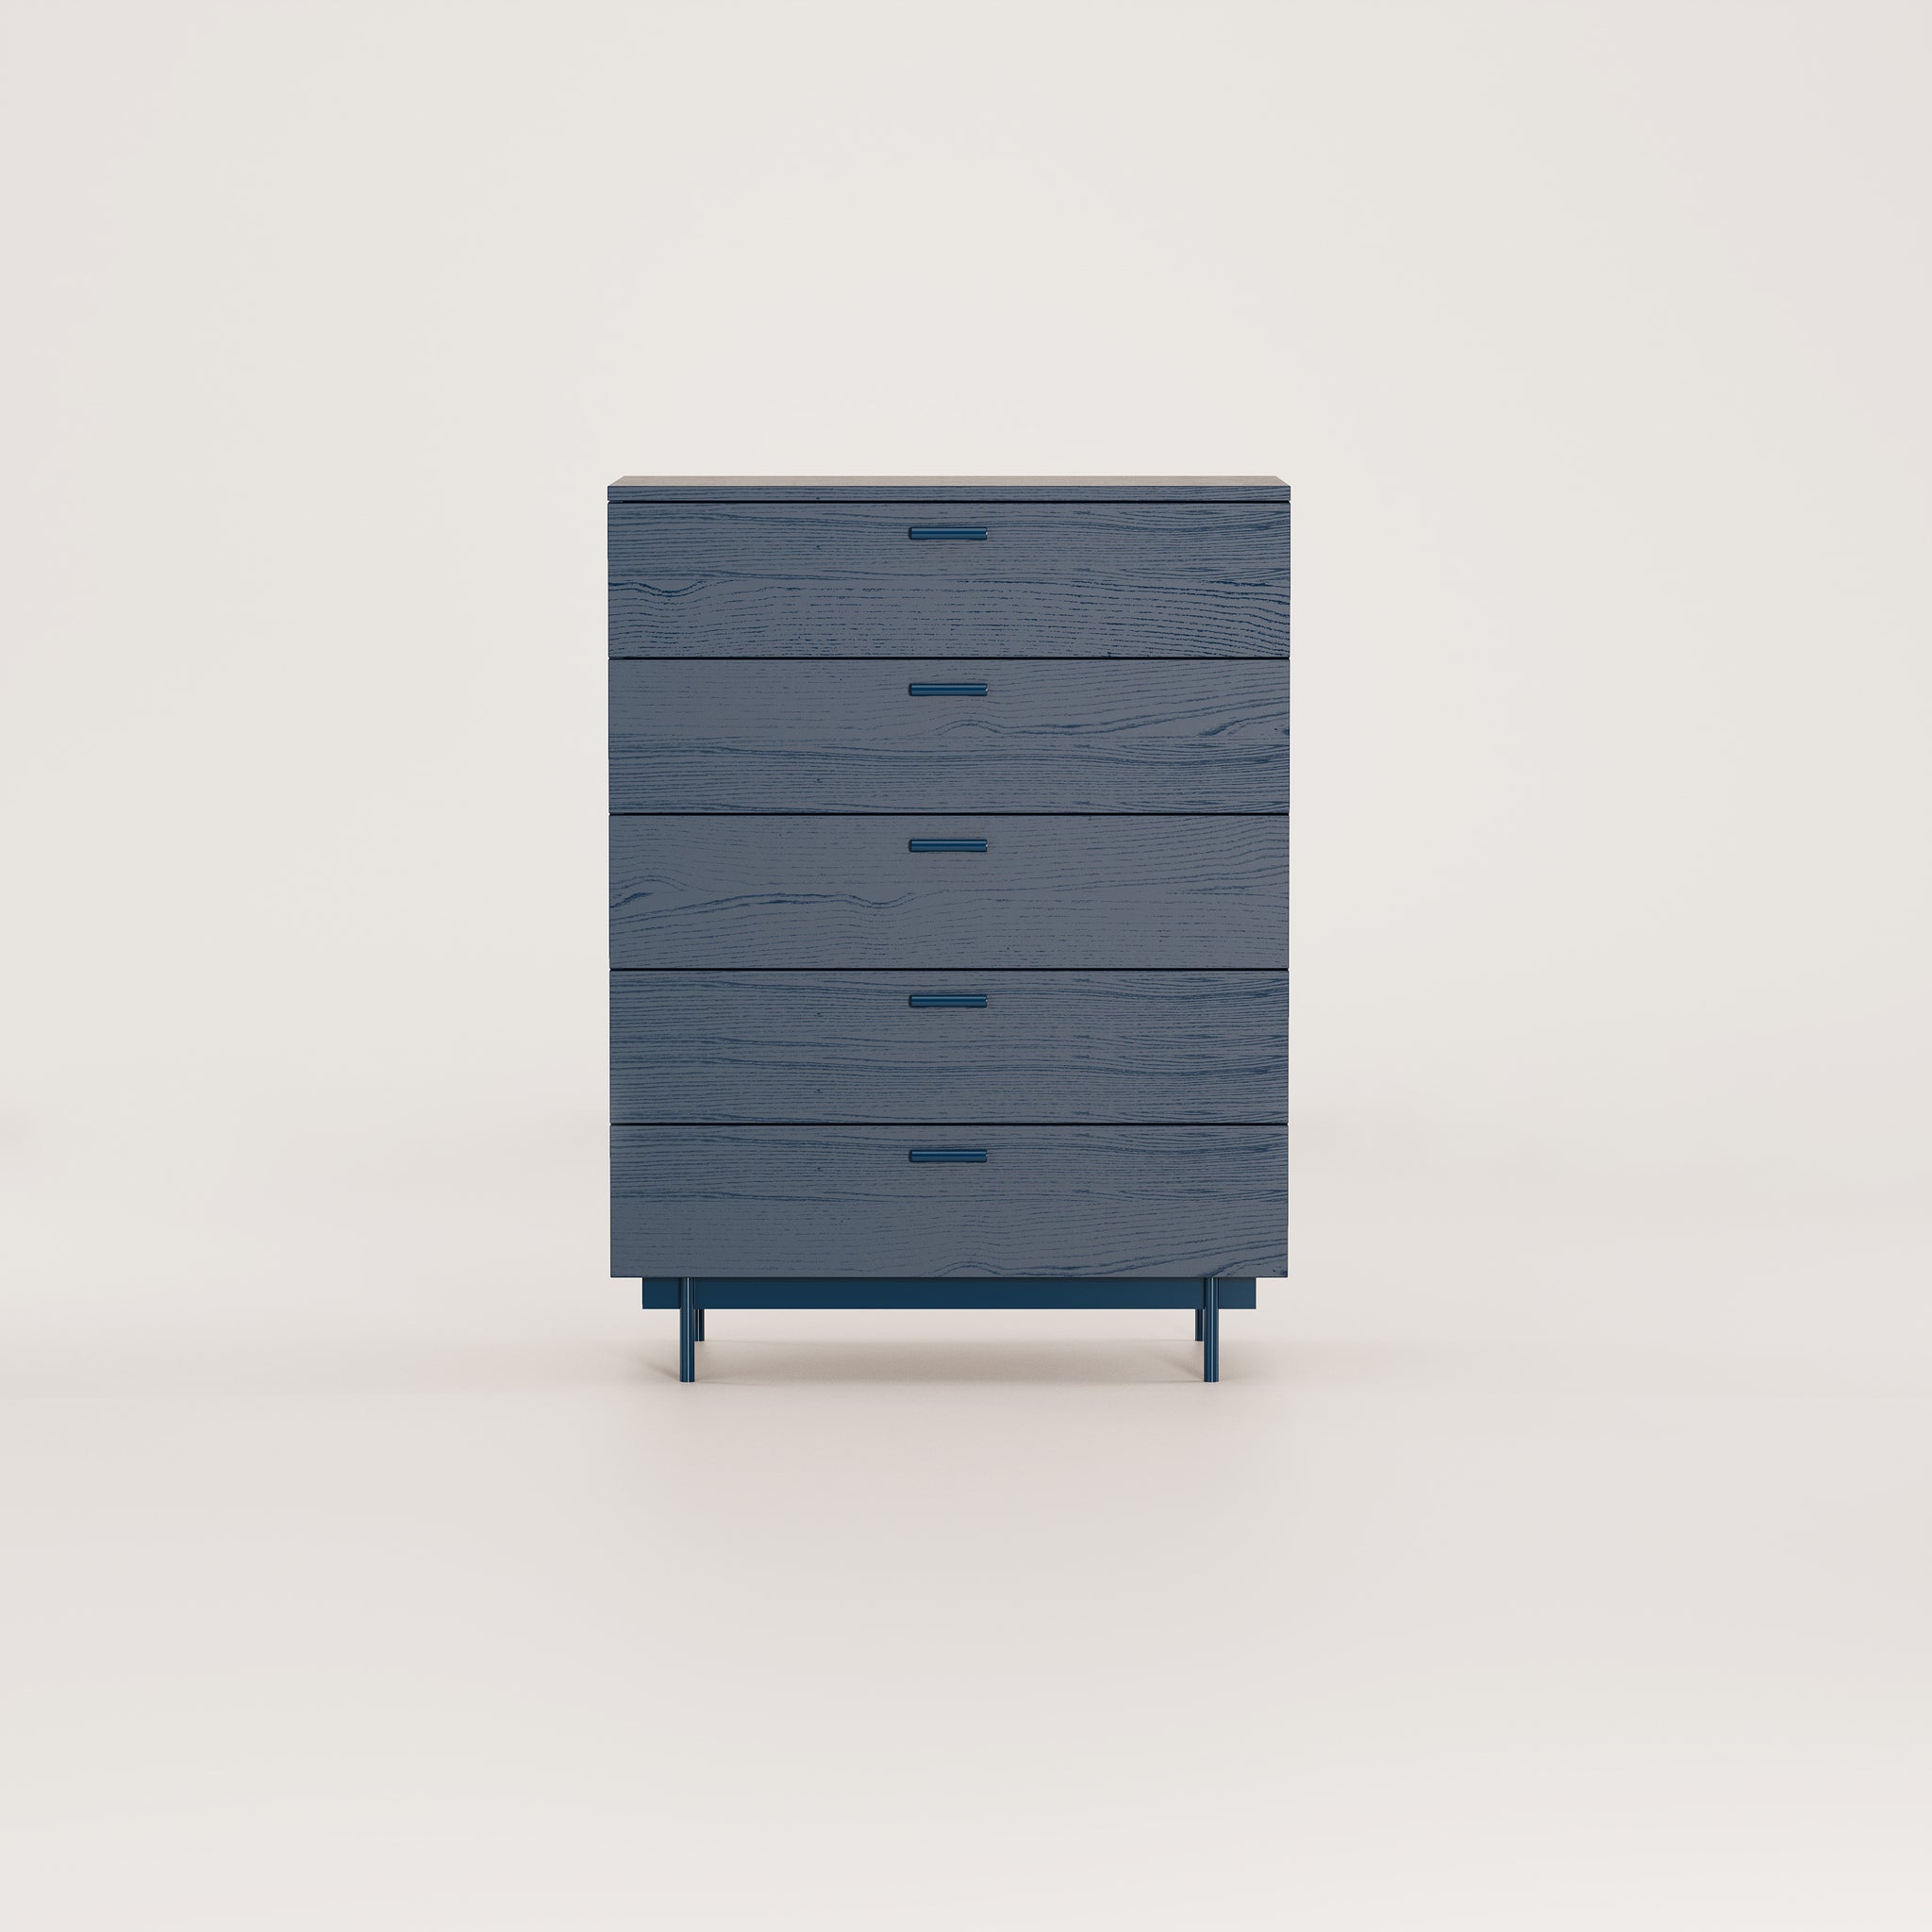 Park tallboy painted furniture by Mast Furniture